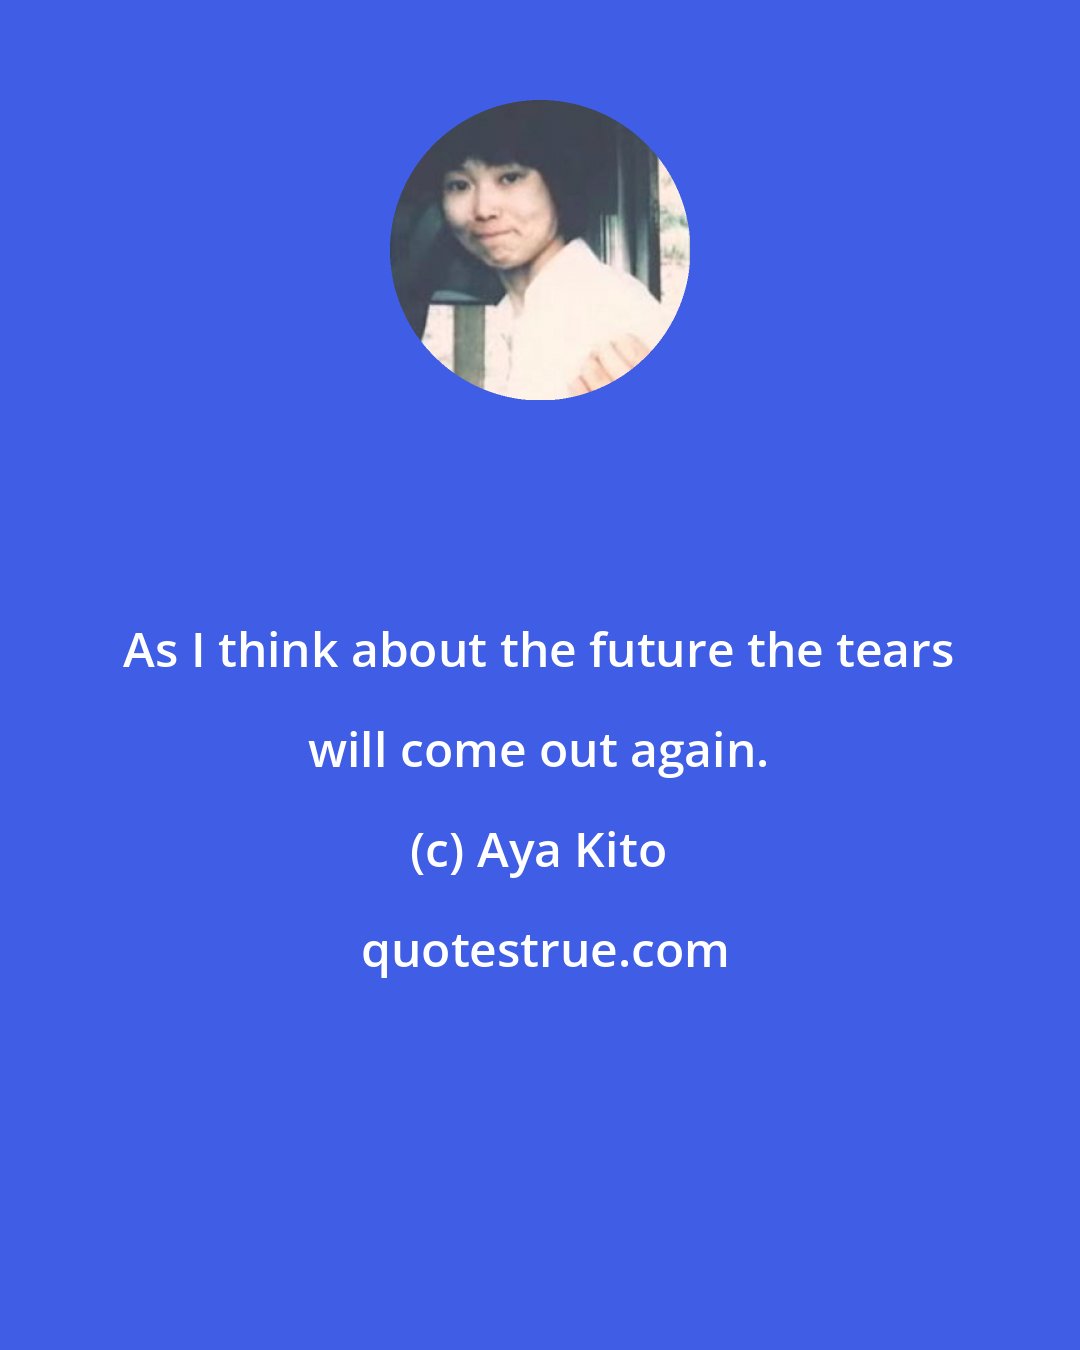 Aya Kito: As I think about the future the tears will come out again.